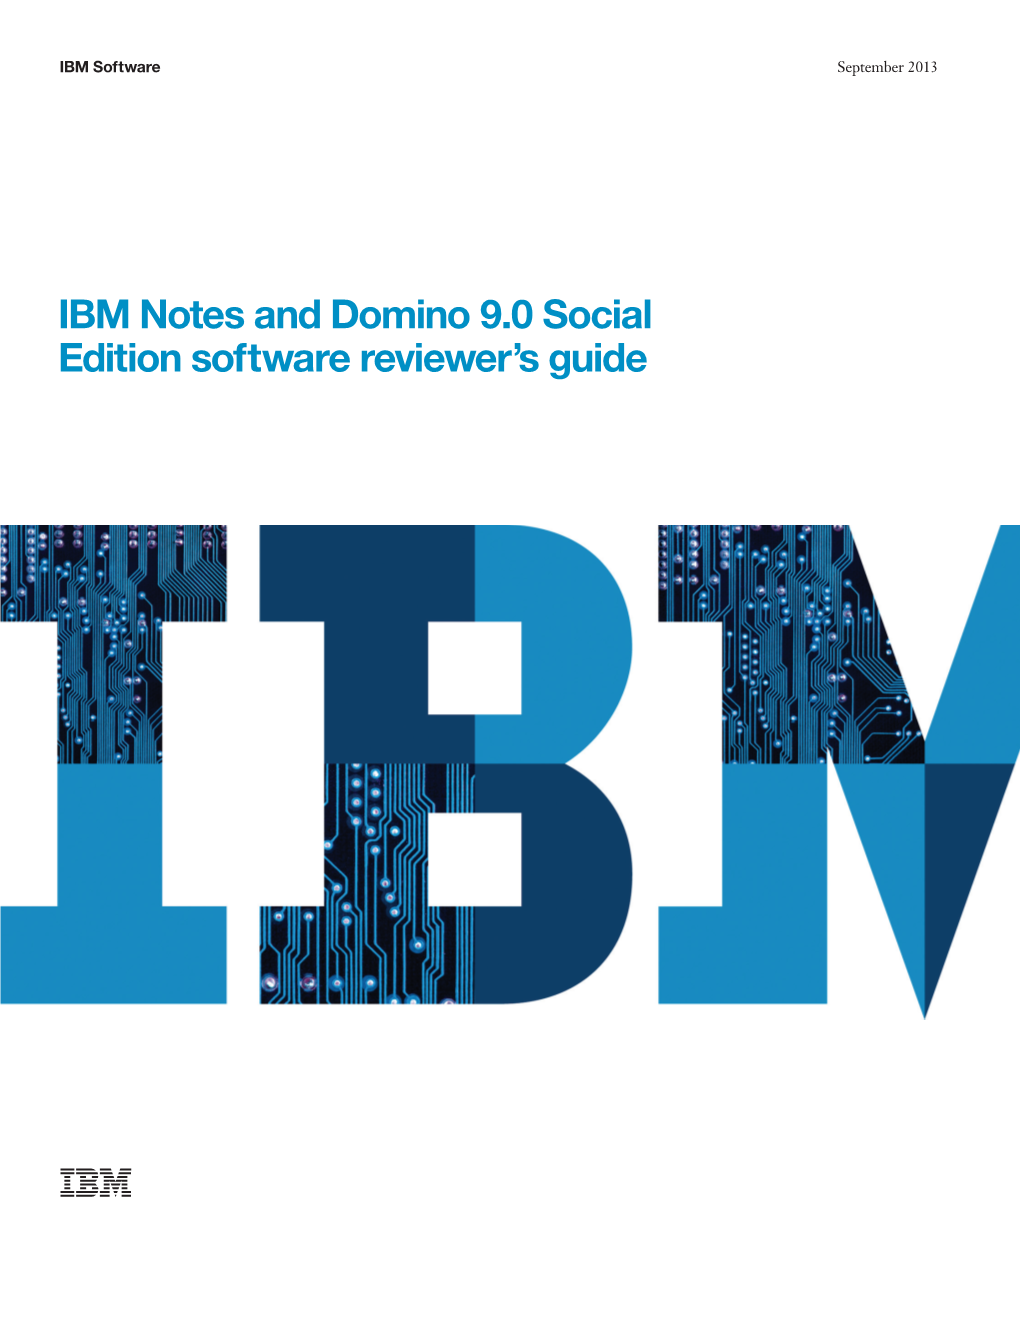 IBM Notes and Domino 9.0 Social Edition Software Reviewer's Guide